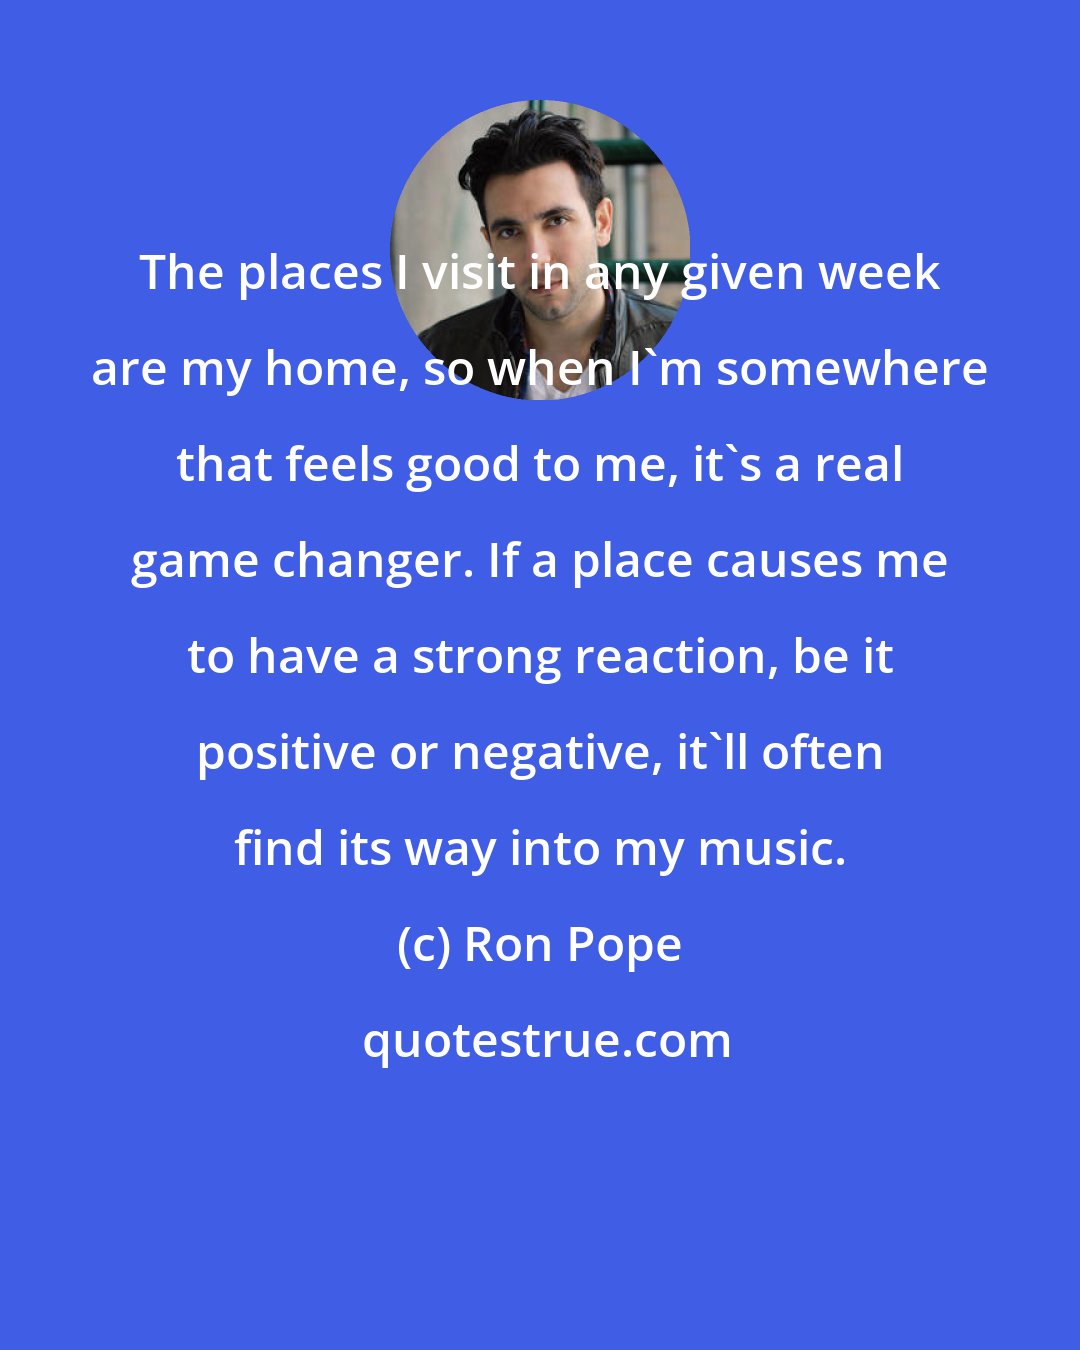 Ron Pope: The places I visit in any given week are my home, so when I'm somewhere that feels good to me, it's a real game changer. If a place causes me to have a strong reaction, be it positive or negative, it'll often find its way into my music.